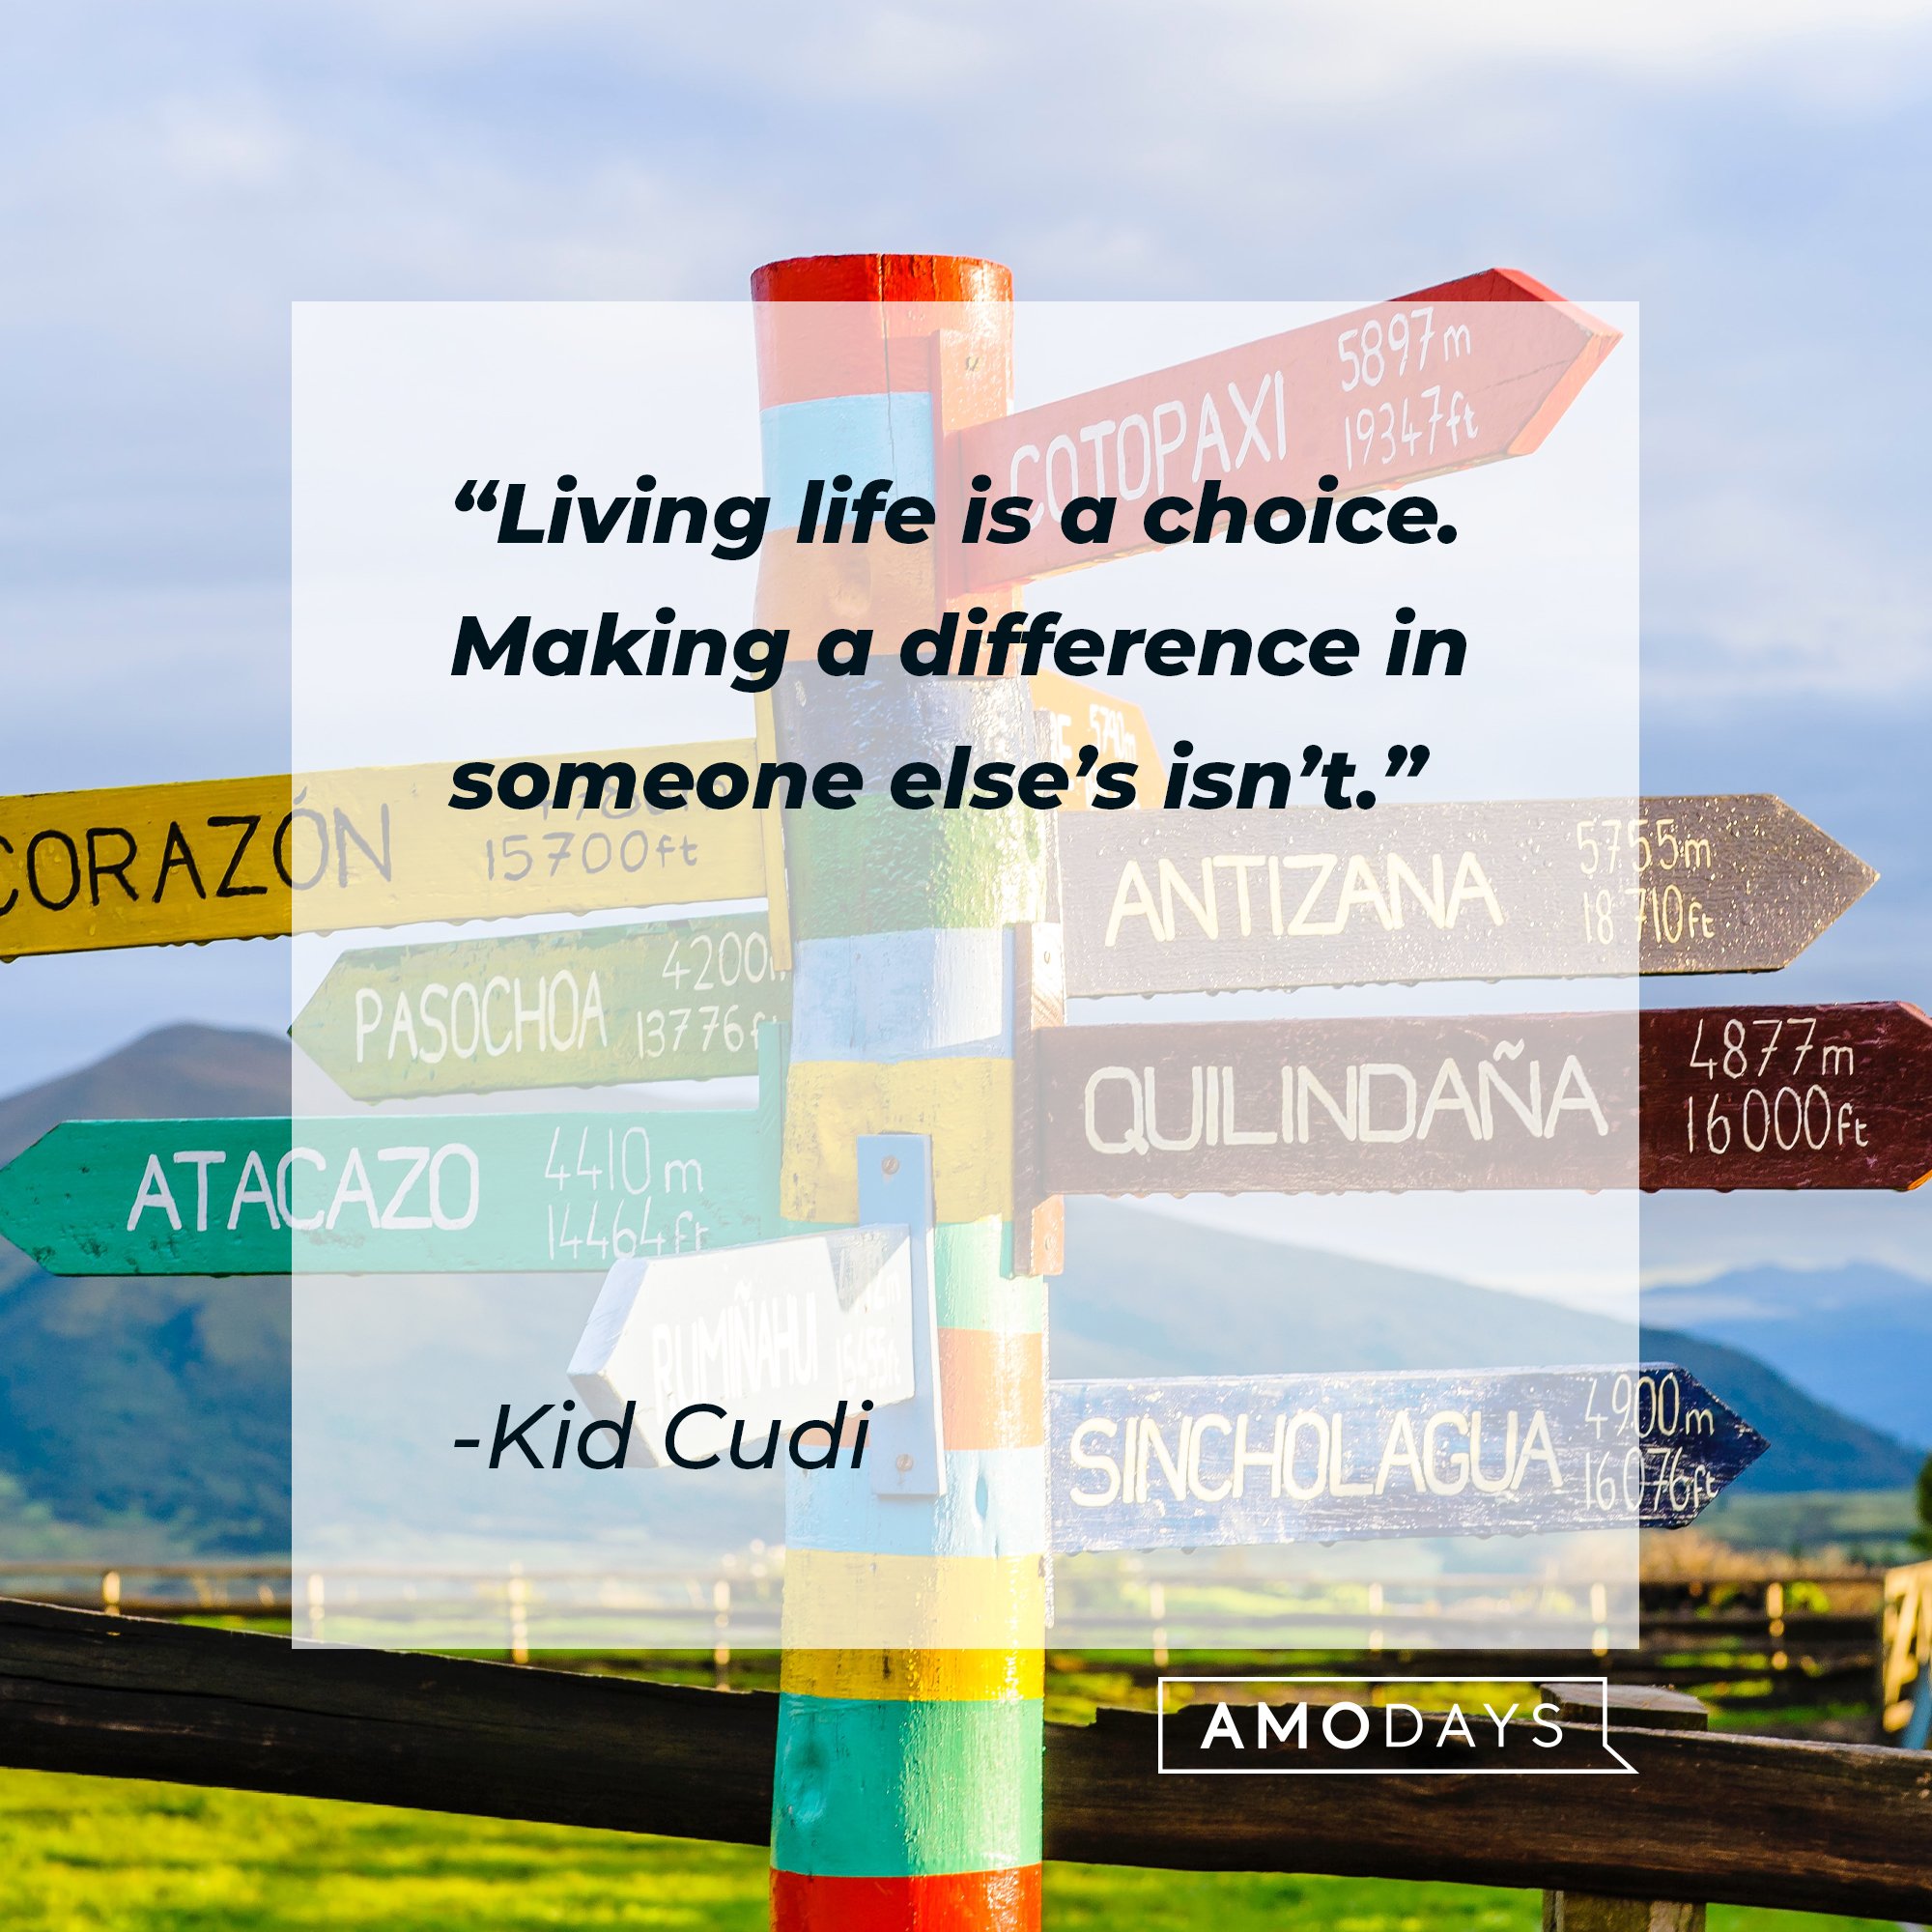 Kid Cudi’s quote: “Living life is a choice. Making a difference in someone else’s isn’t.” | Image: AmoDays 